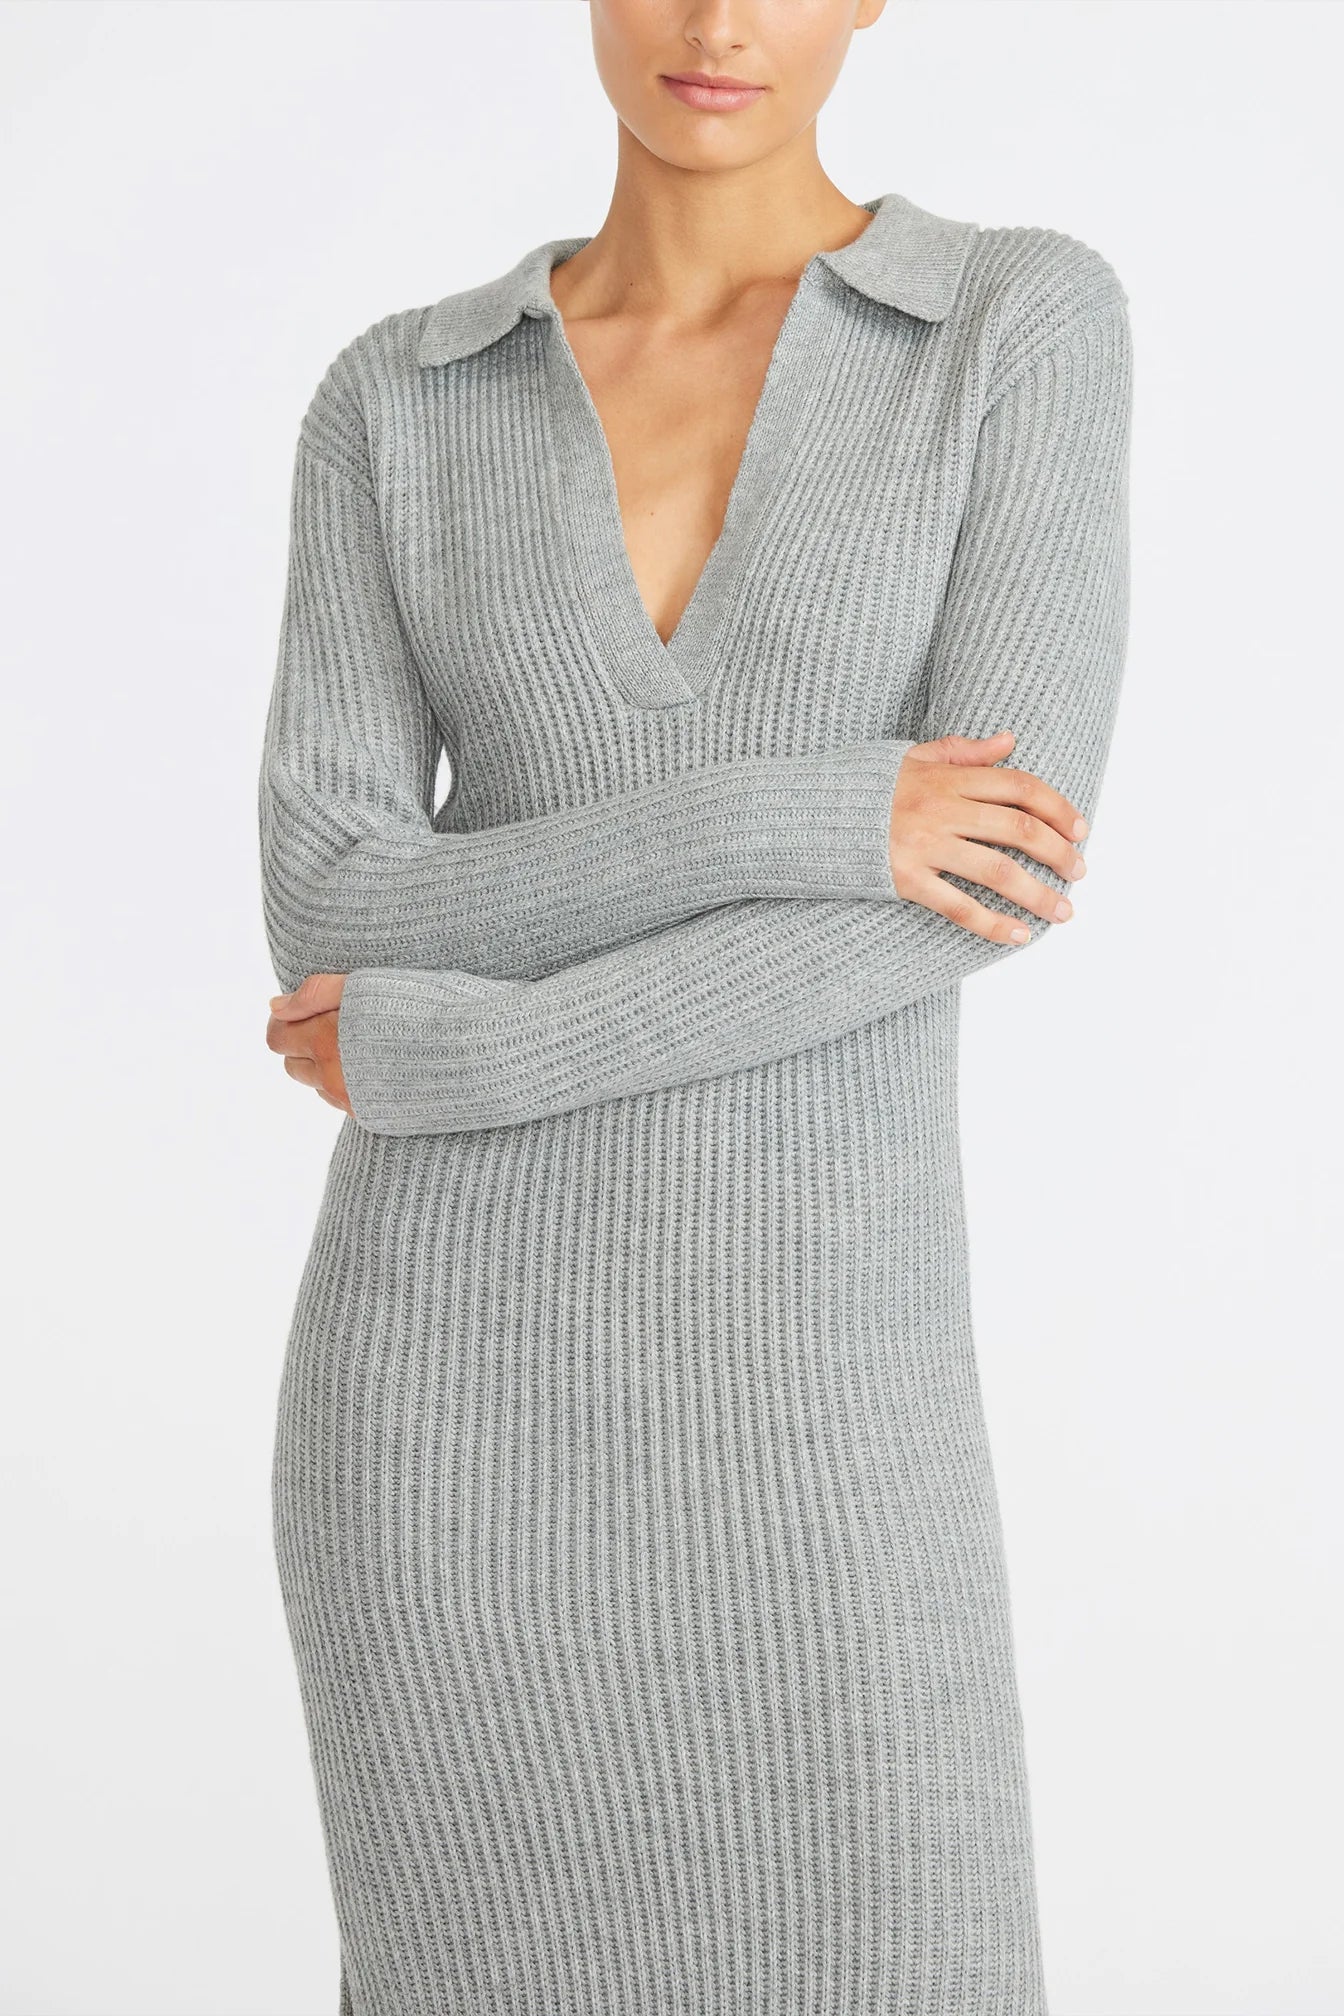 STAPLE THE LABEL - Ivy Knit Dress Grey Marle